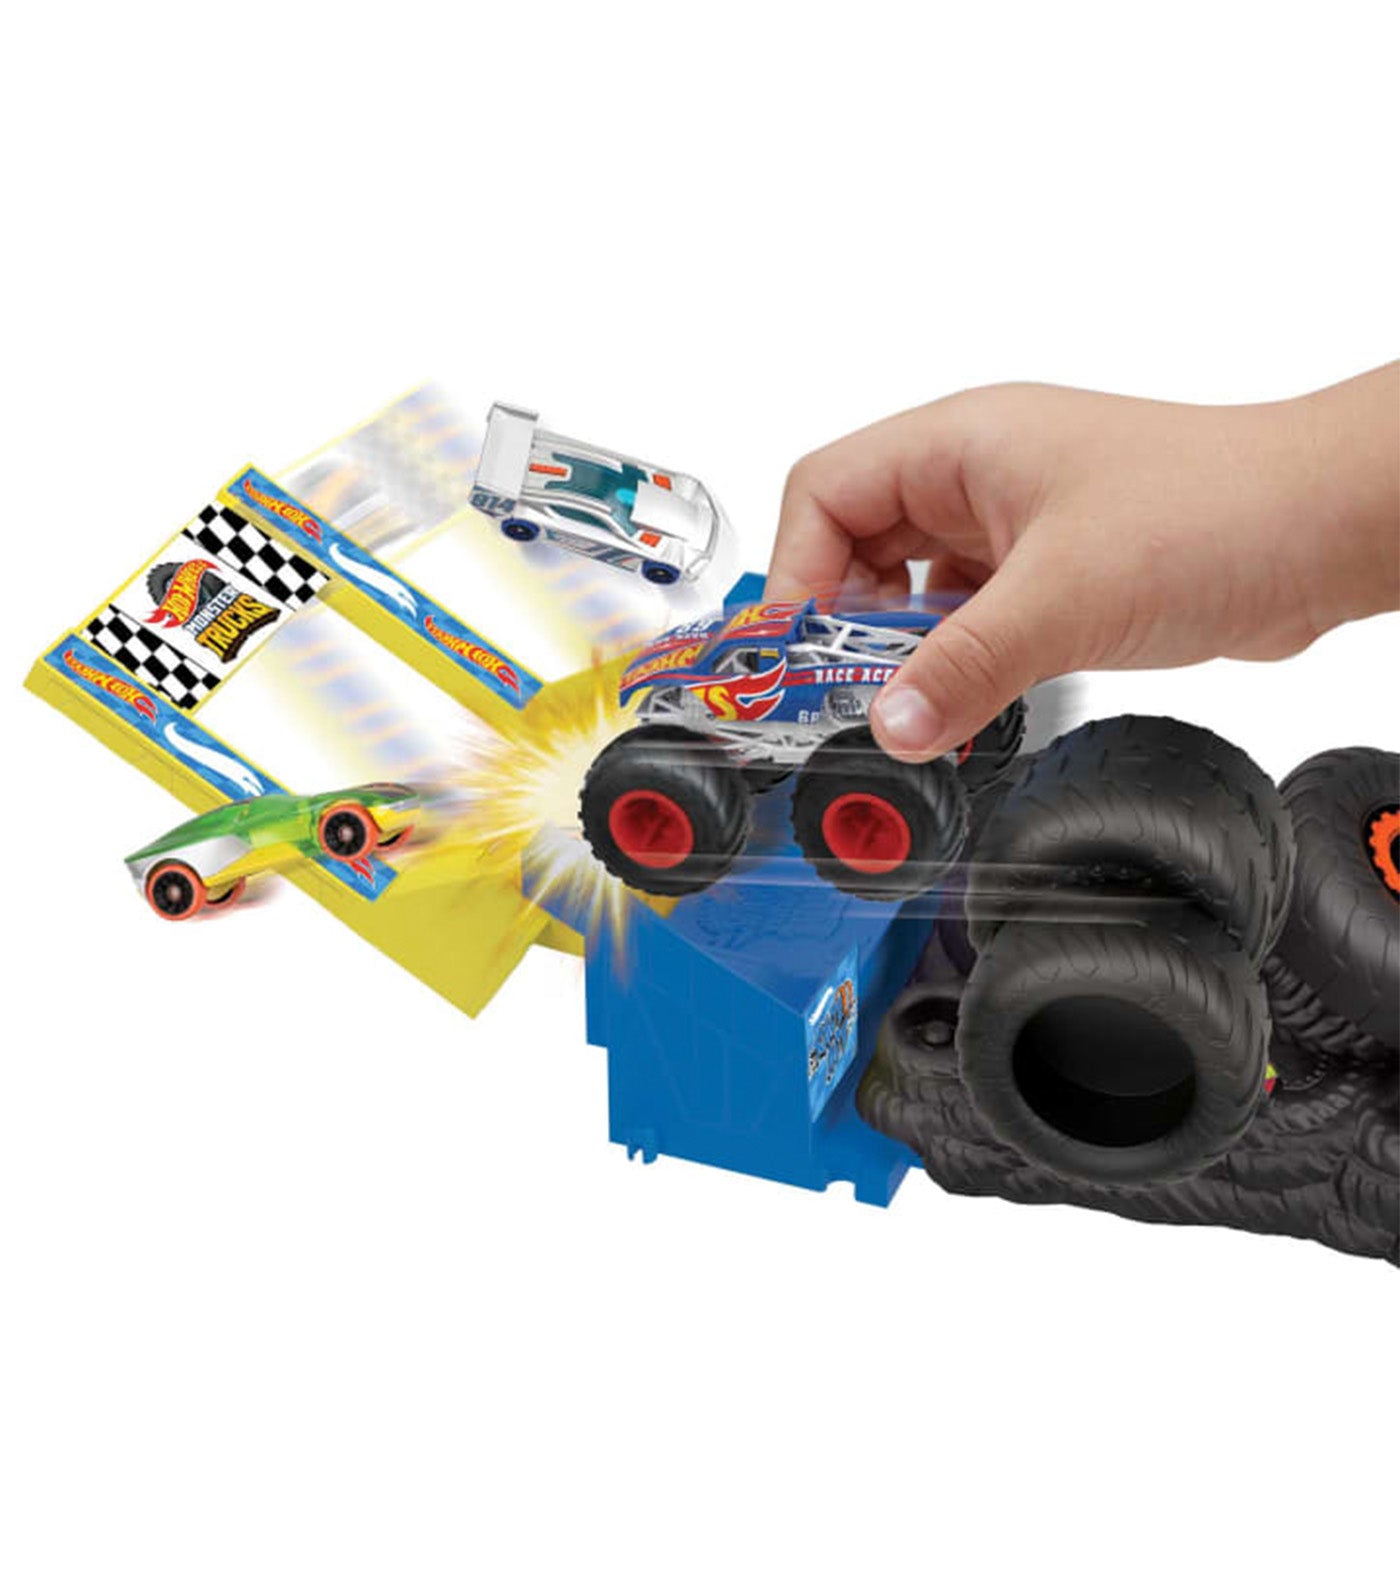 Hot Wheels Monster Trucks Arena Smashers Spin out Challenge New 2023 